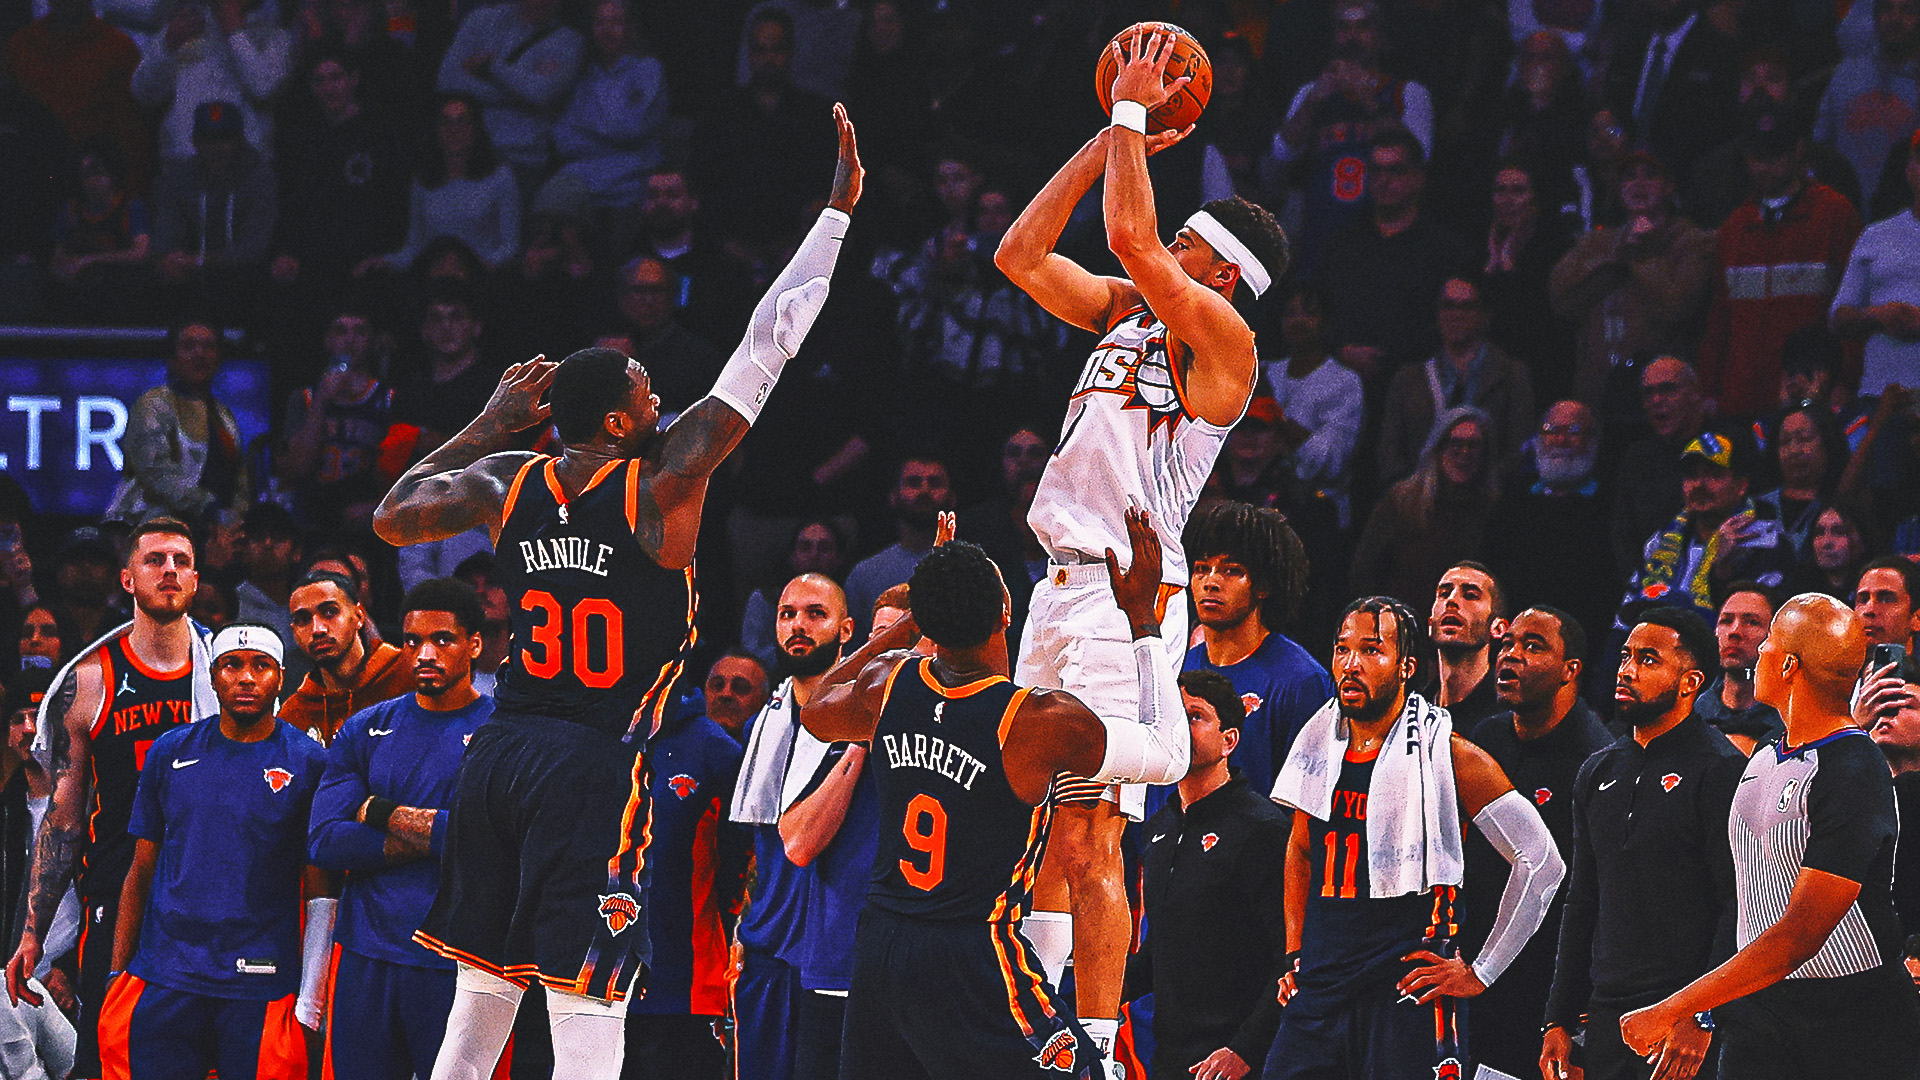 Devin Booker hits 3-pointer with 1.7 seconds left, Suns beat Knicks 116-113 for 7th straight win